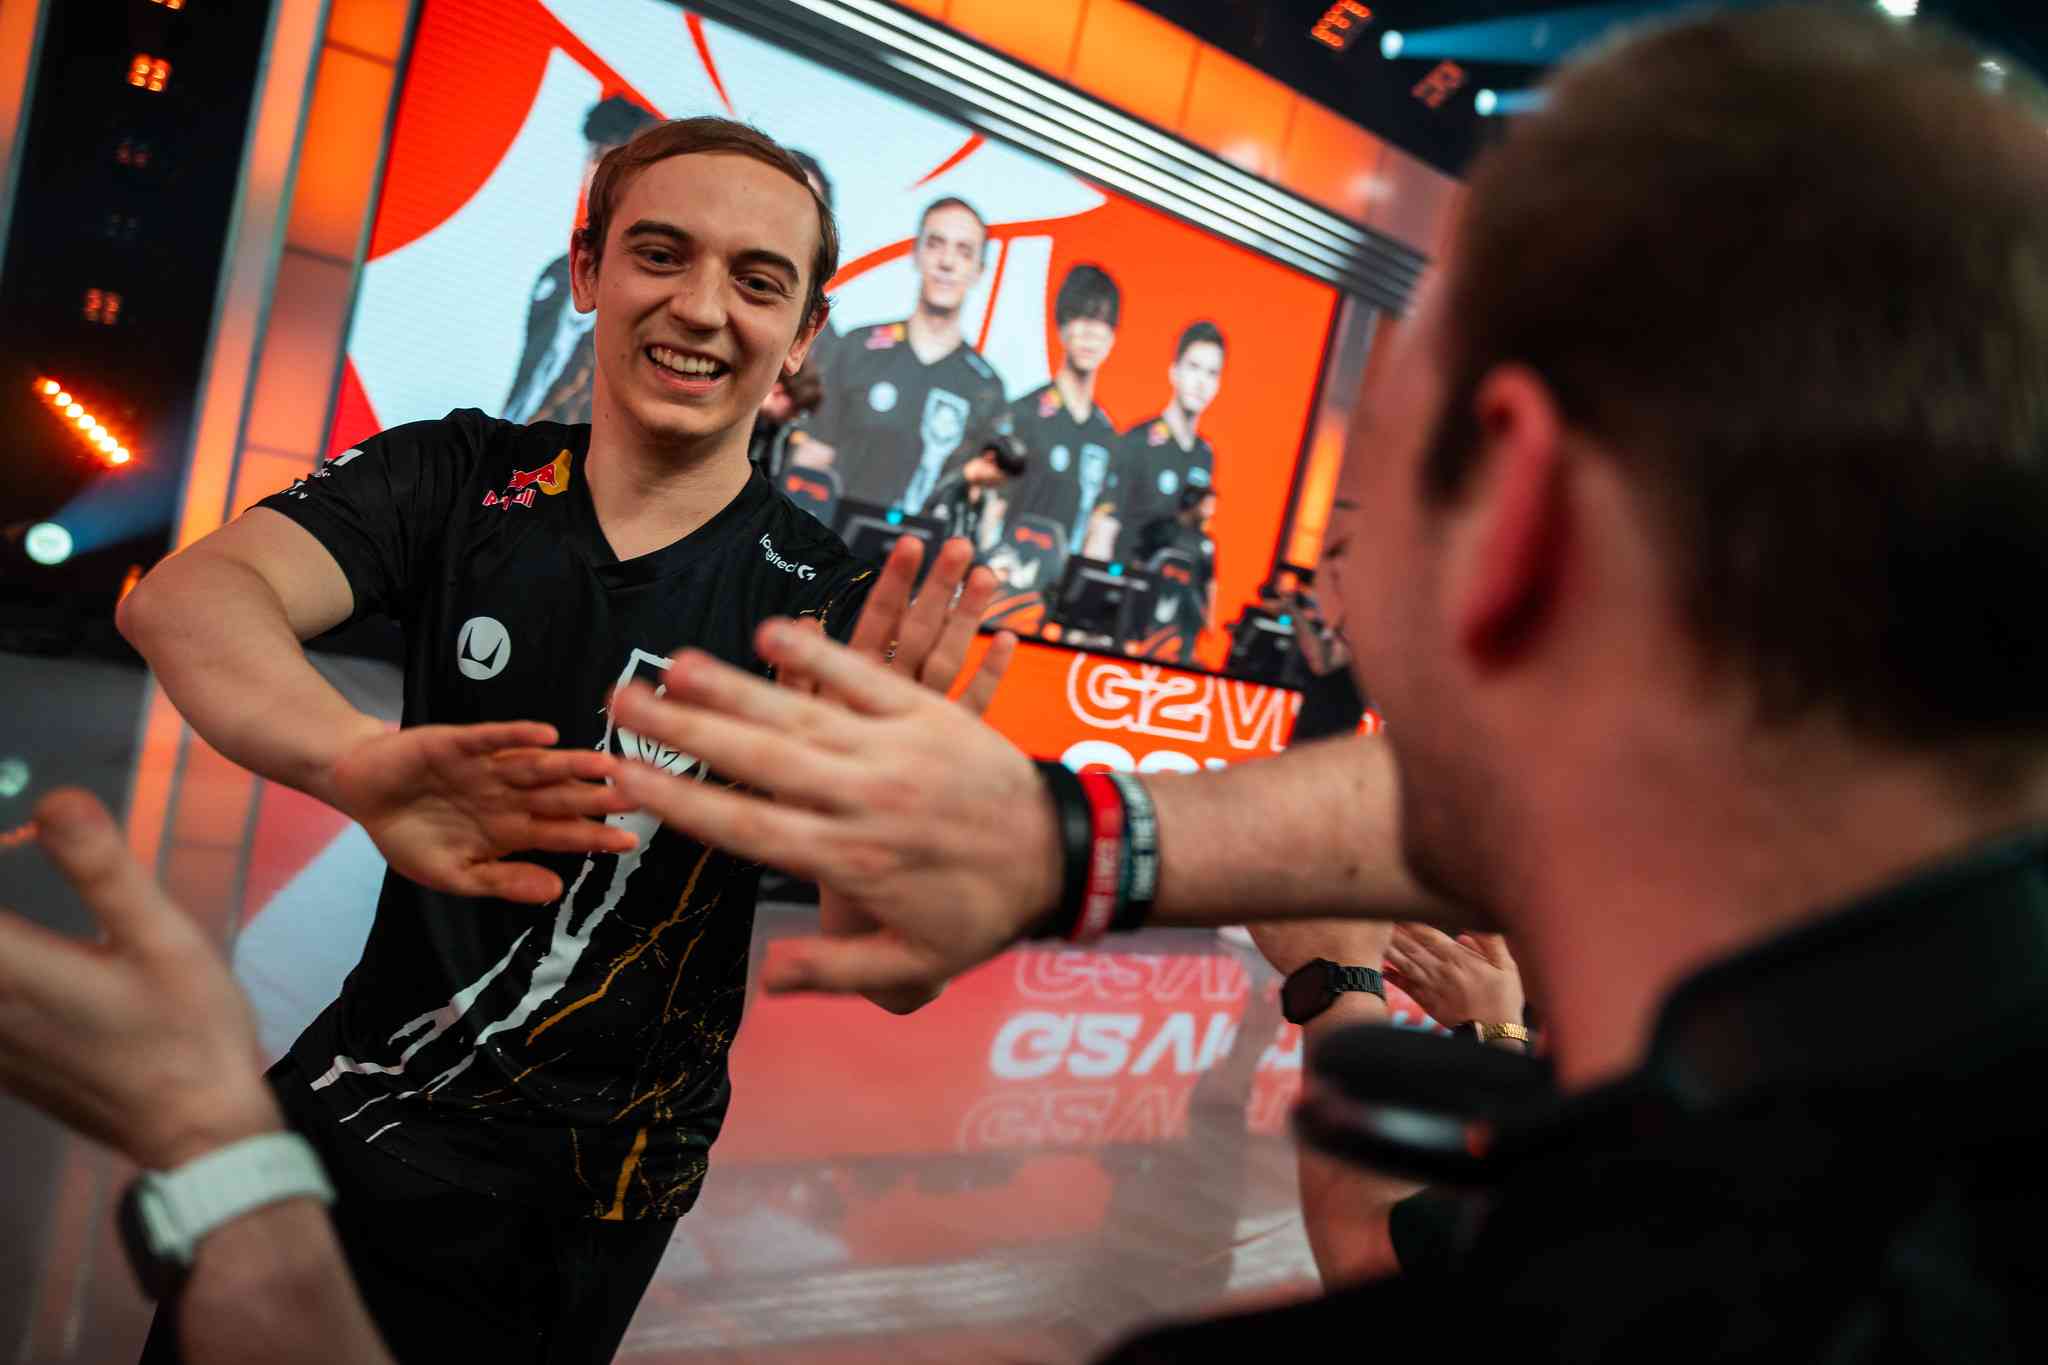 The only people happier than G2 fans after a win are G2 players. Credit: Wojciech Wandzel/Riot Games